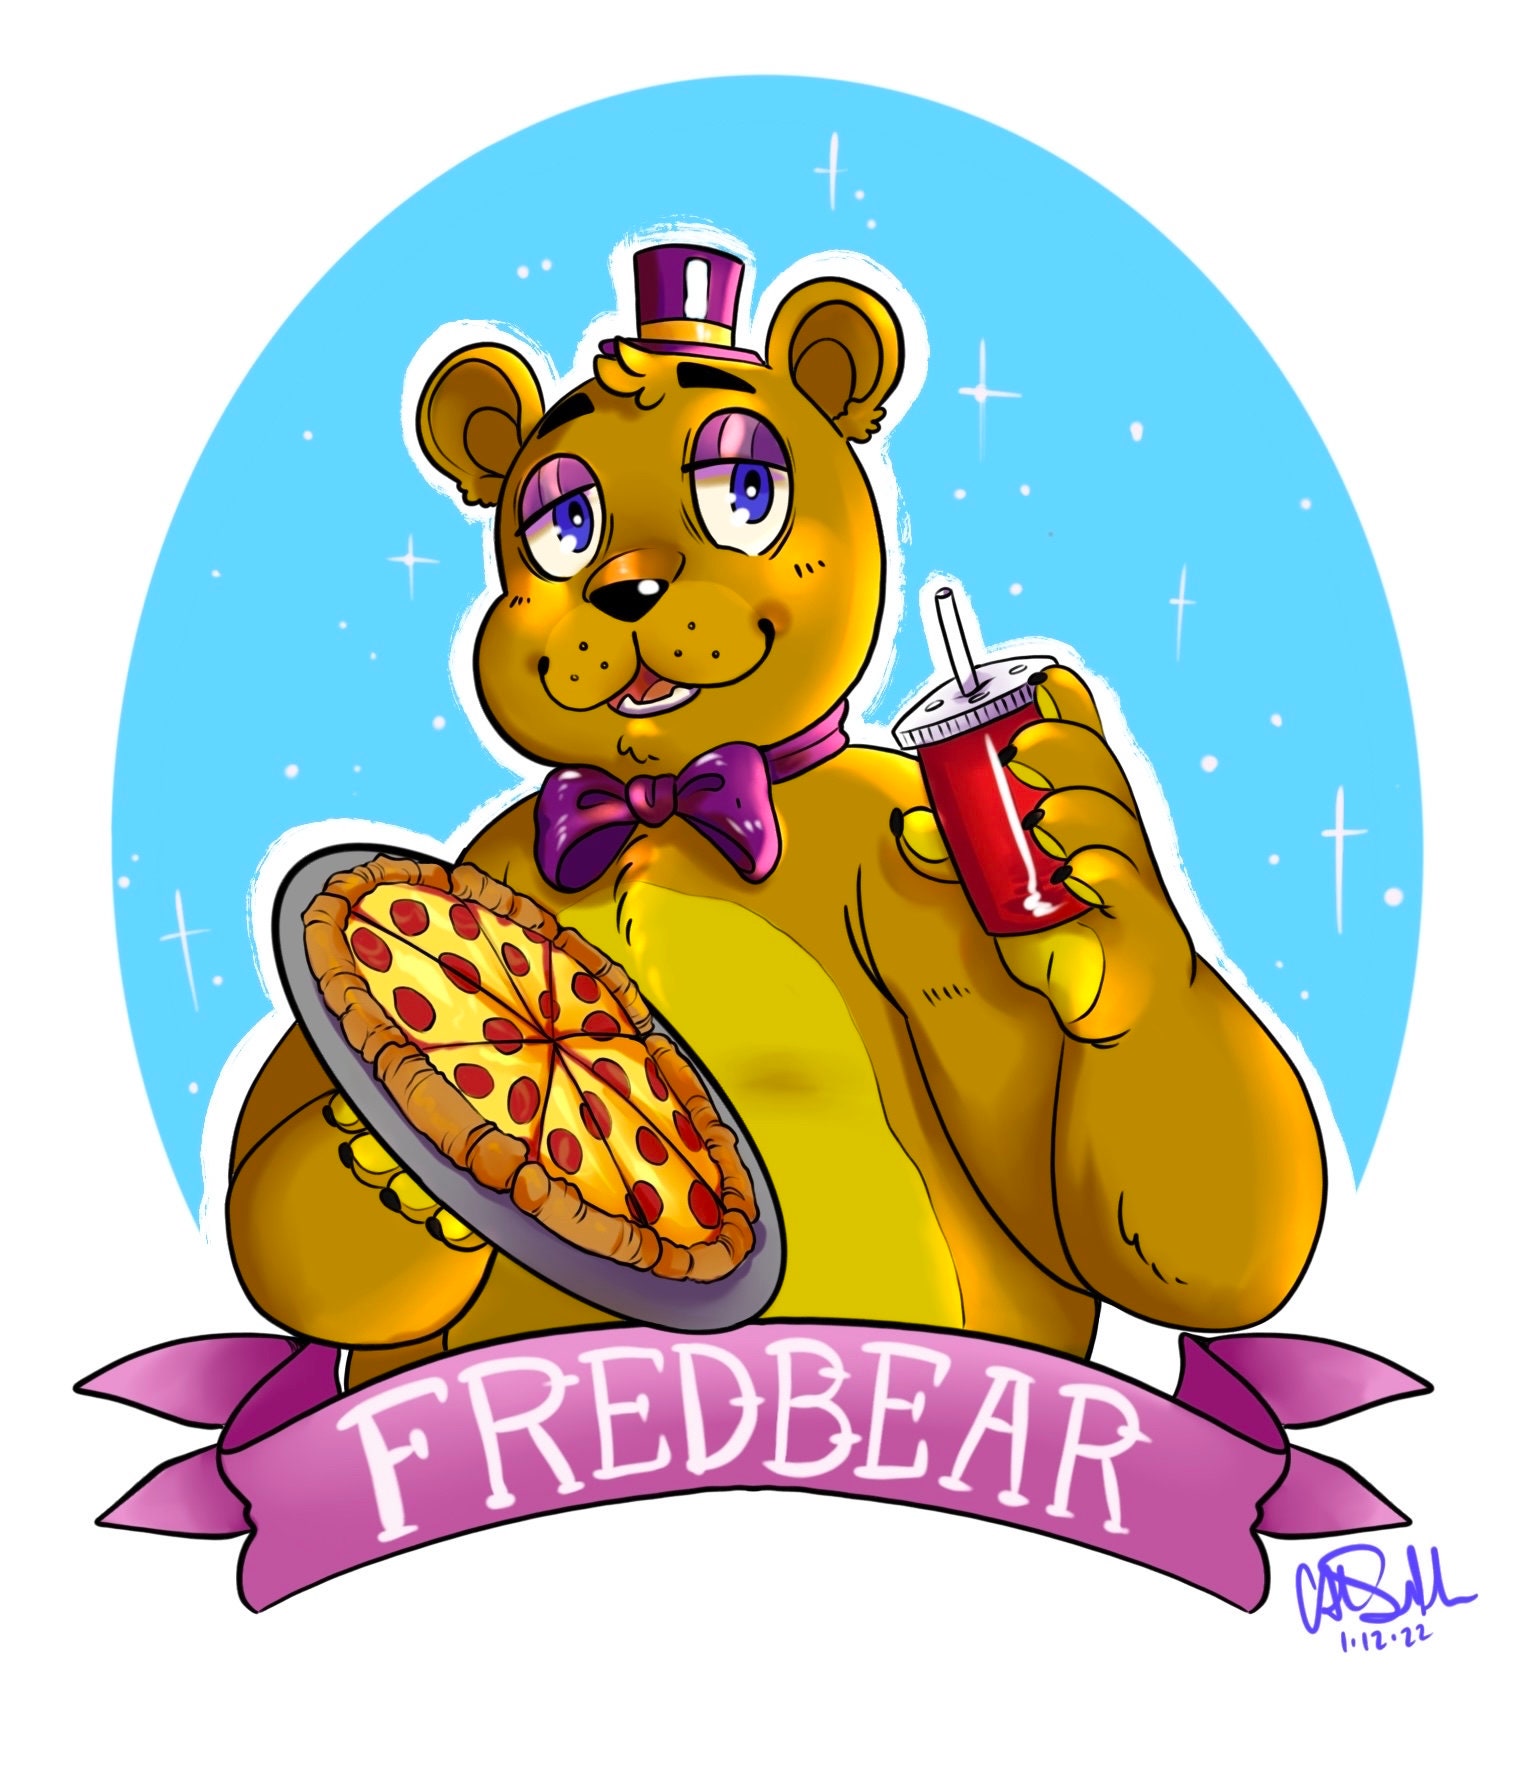 Fredbear's Family Diner (Vintage)  Pin for Sale by Hush-Art